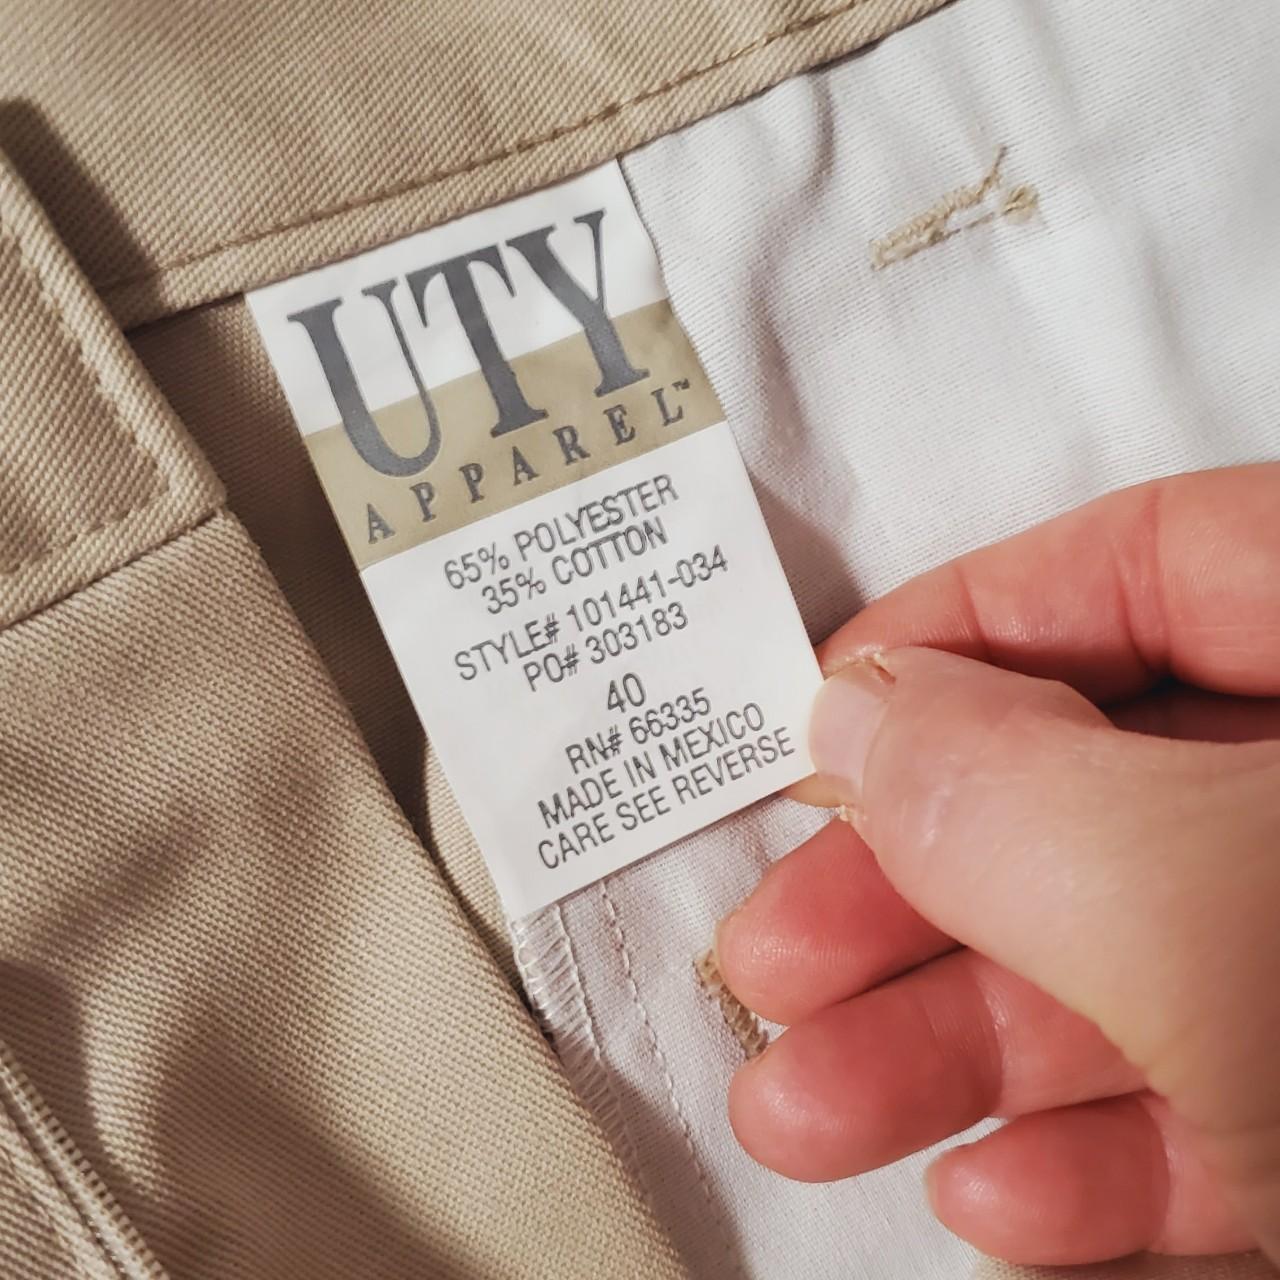 Men's Short UTY Apparel, New with tag , Beige color